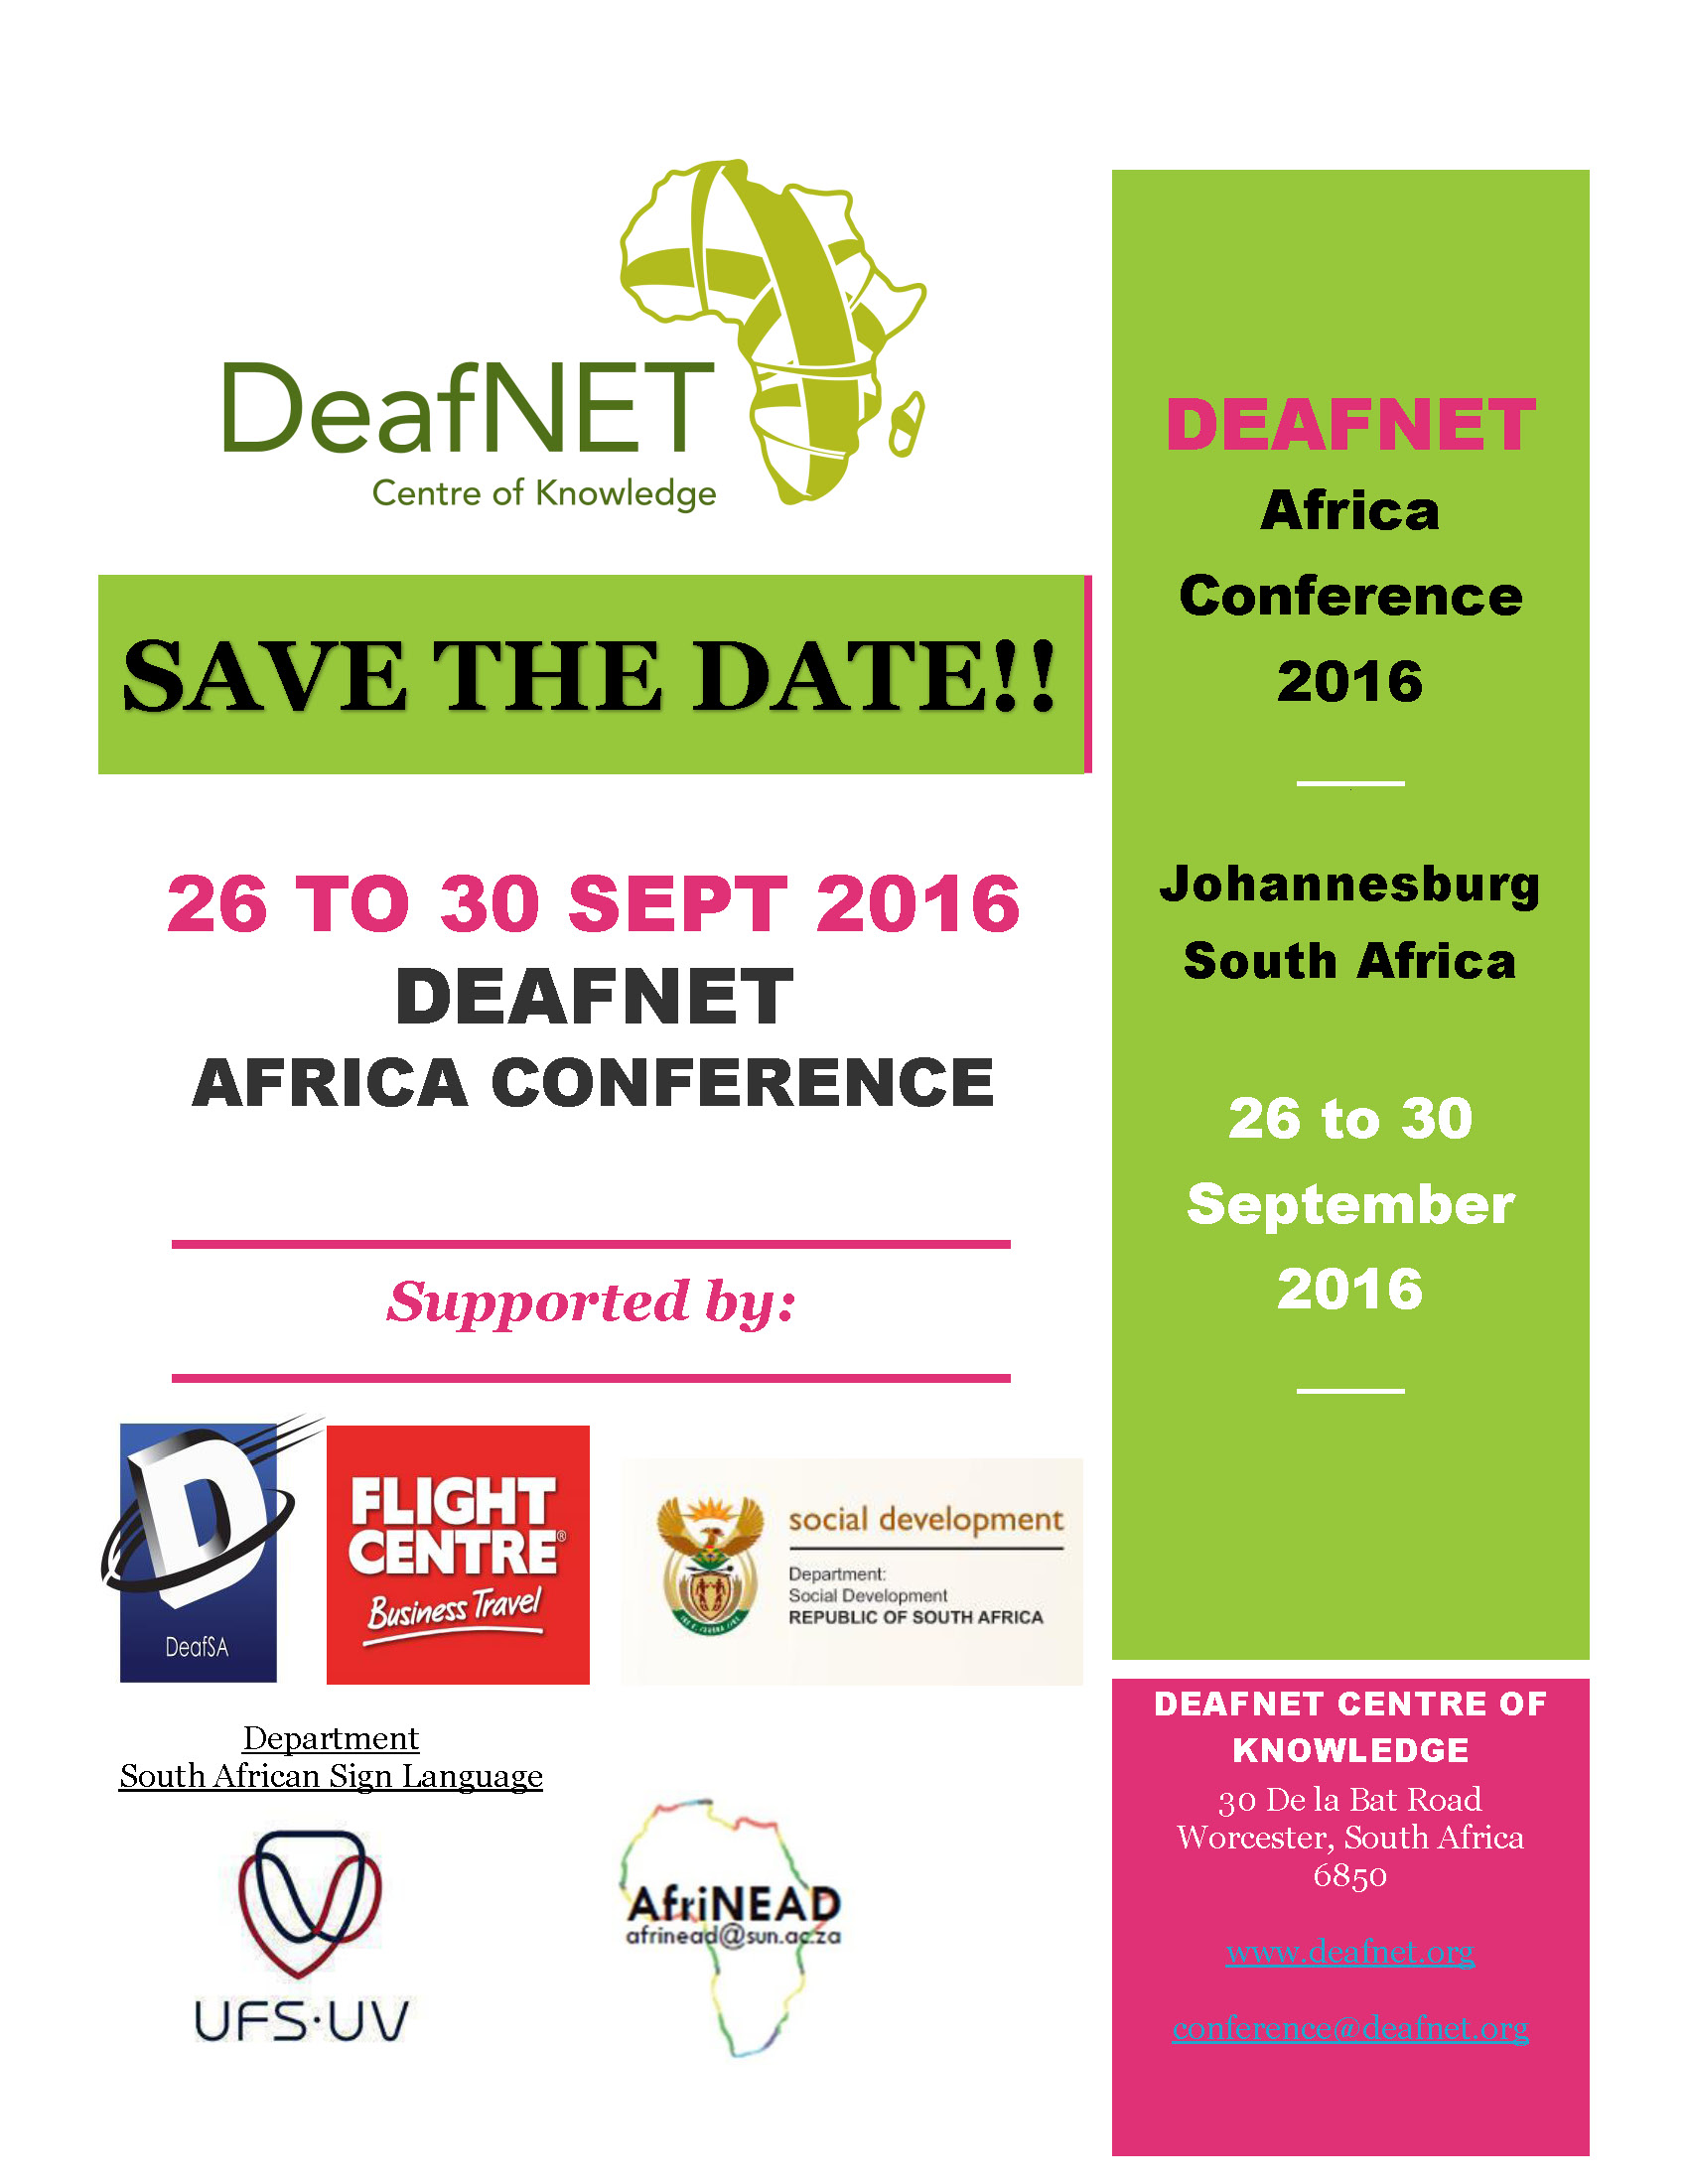 deafnet-save the date - africa conference